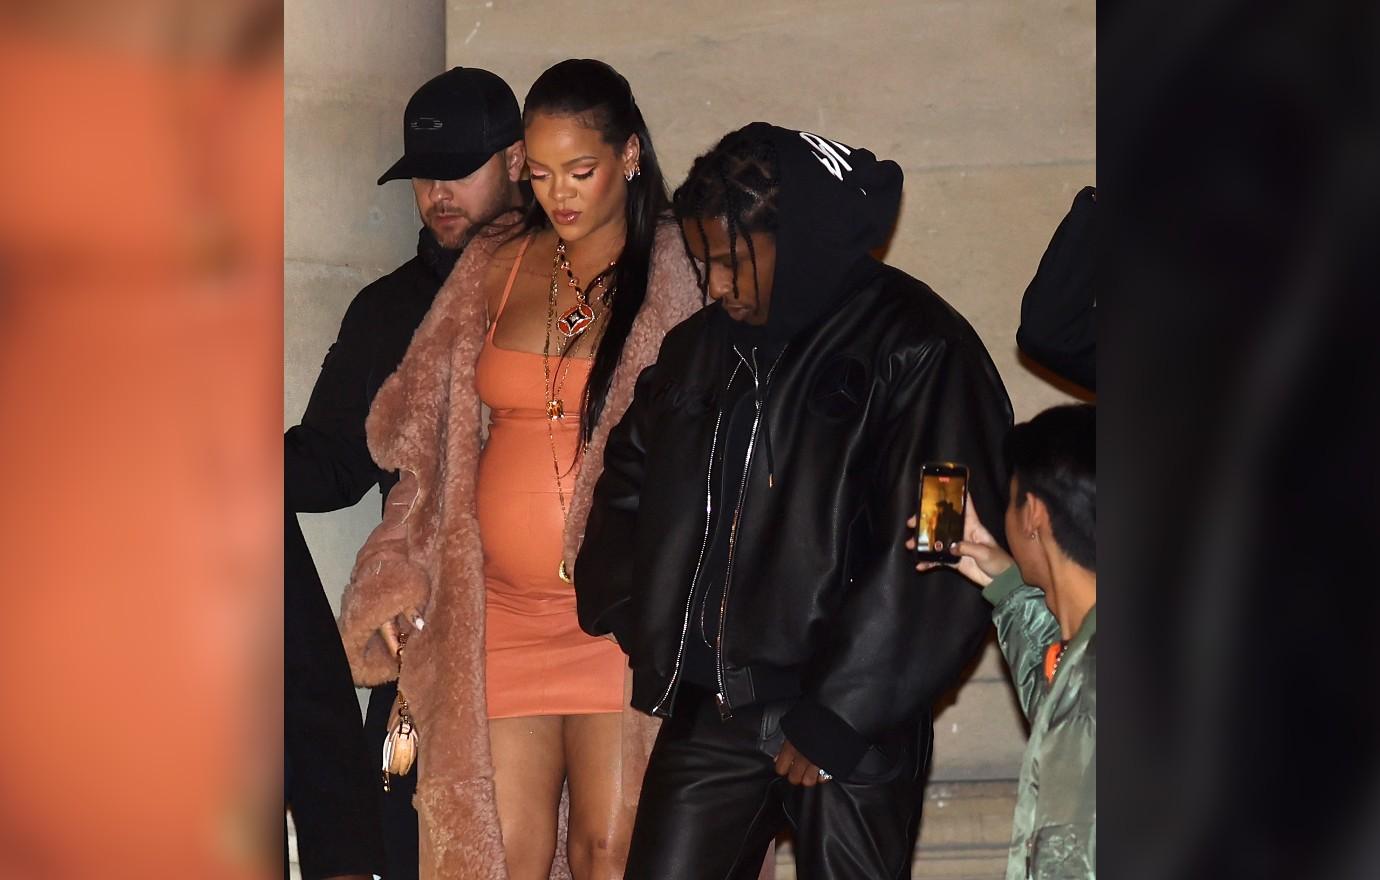 Rihanna and A$AP Rocky escape to Barbados amid cheating rumors